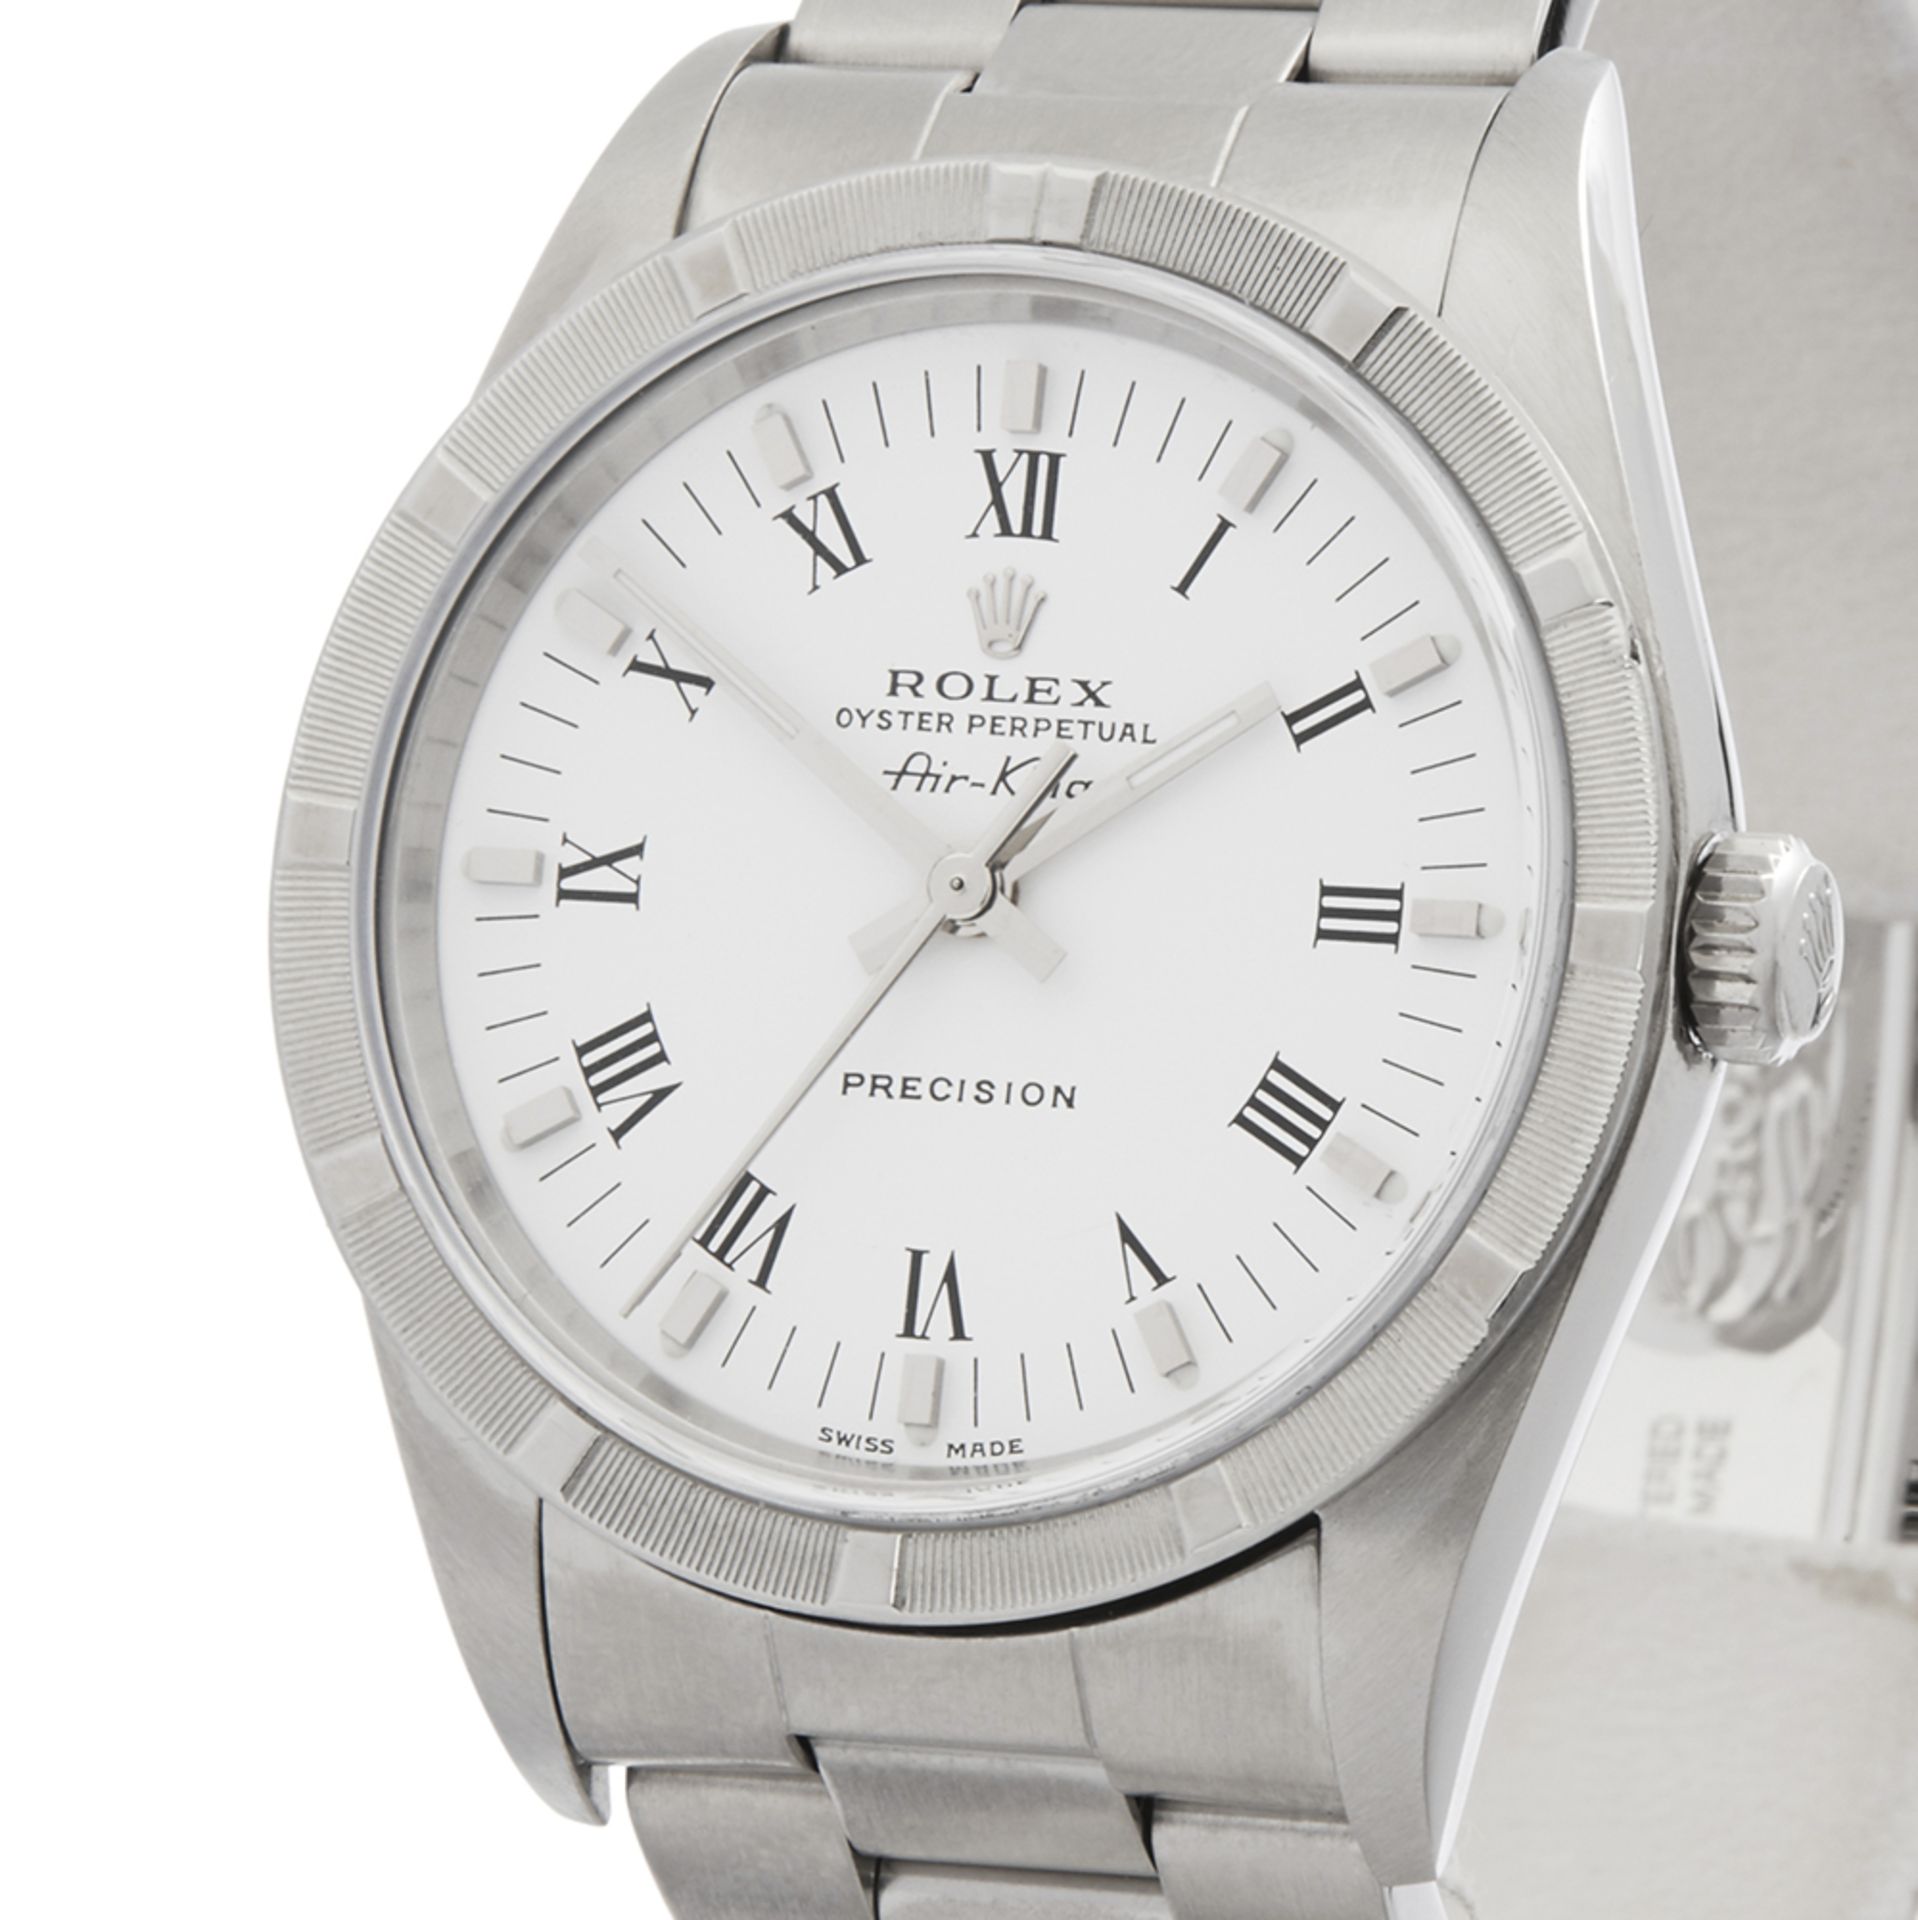 2000 Rolex Air-King 34 Precision Stainless Steel - 14010 - Image 2 of 8